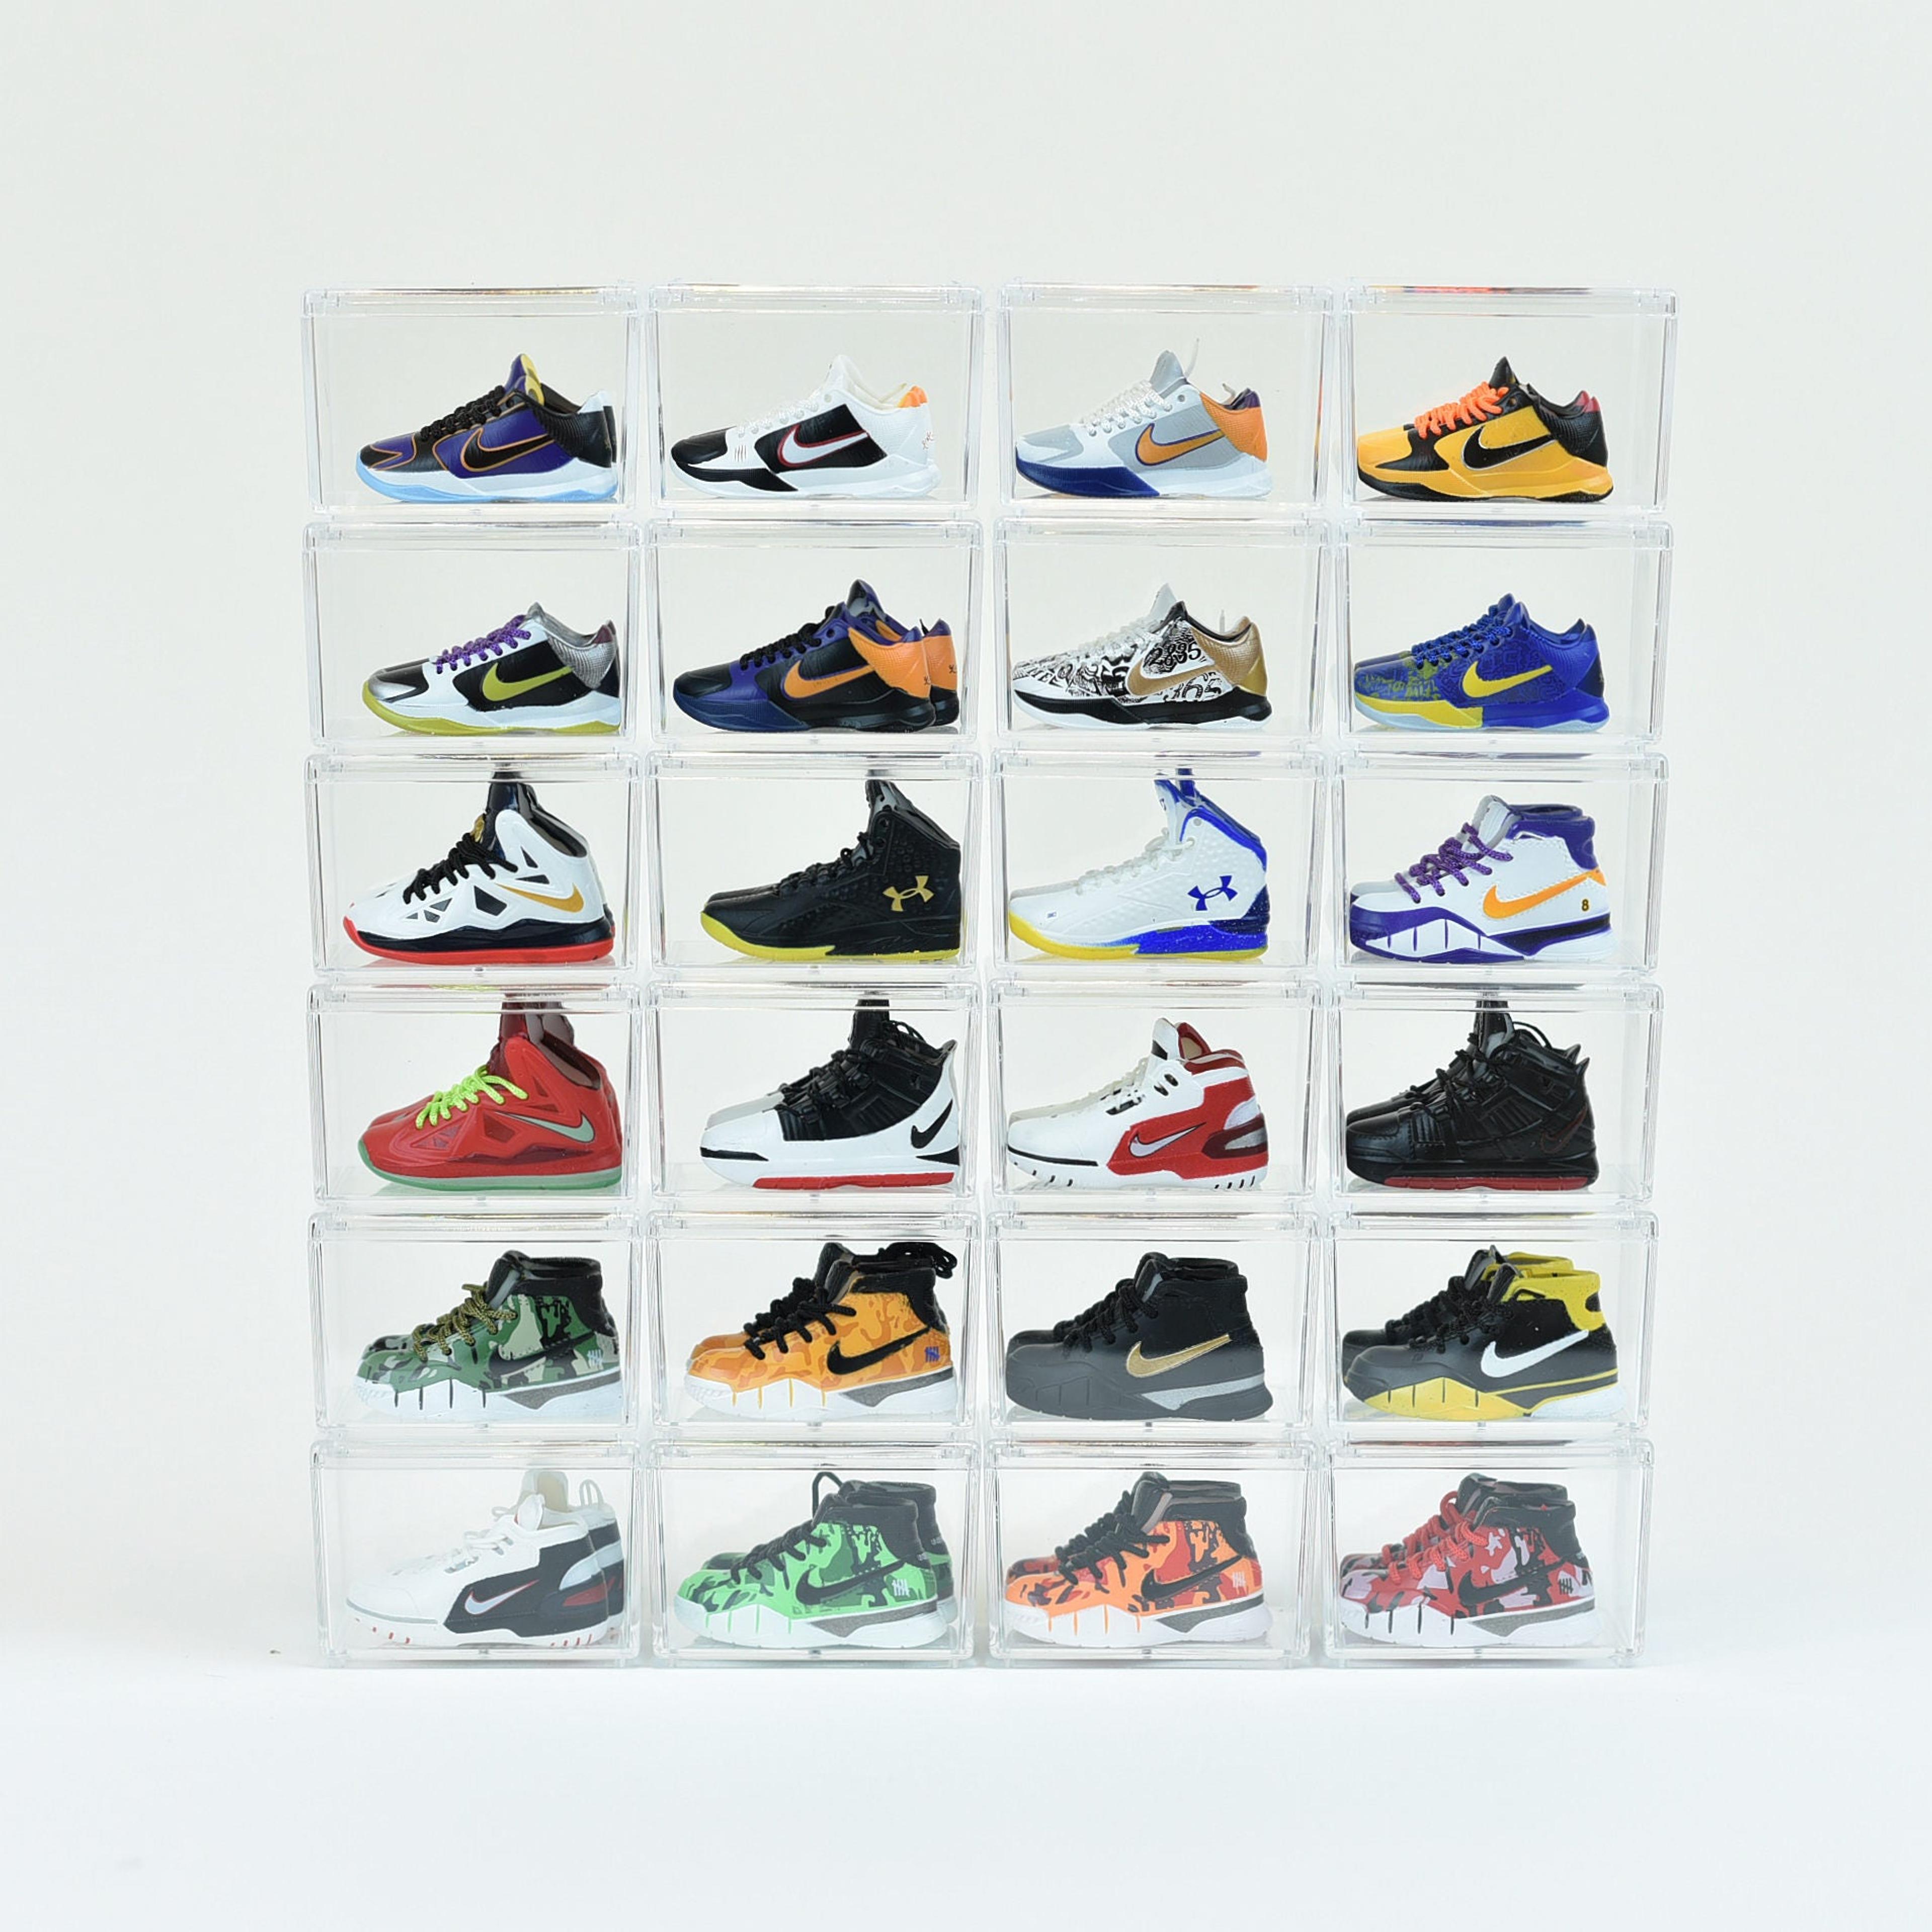 Kobe Bryant/LeBron James/Steph Curry Mini Sneaker Collection wit